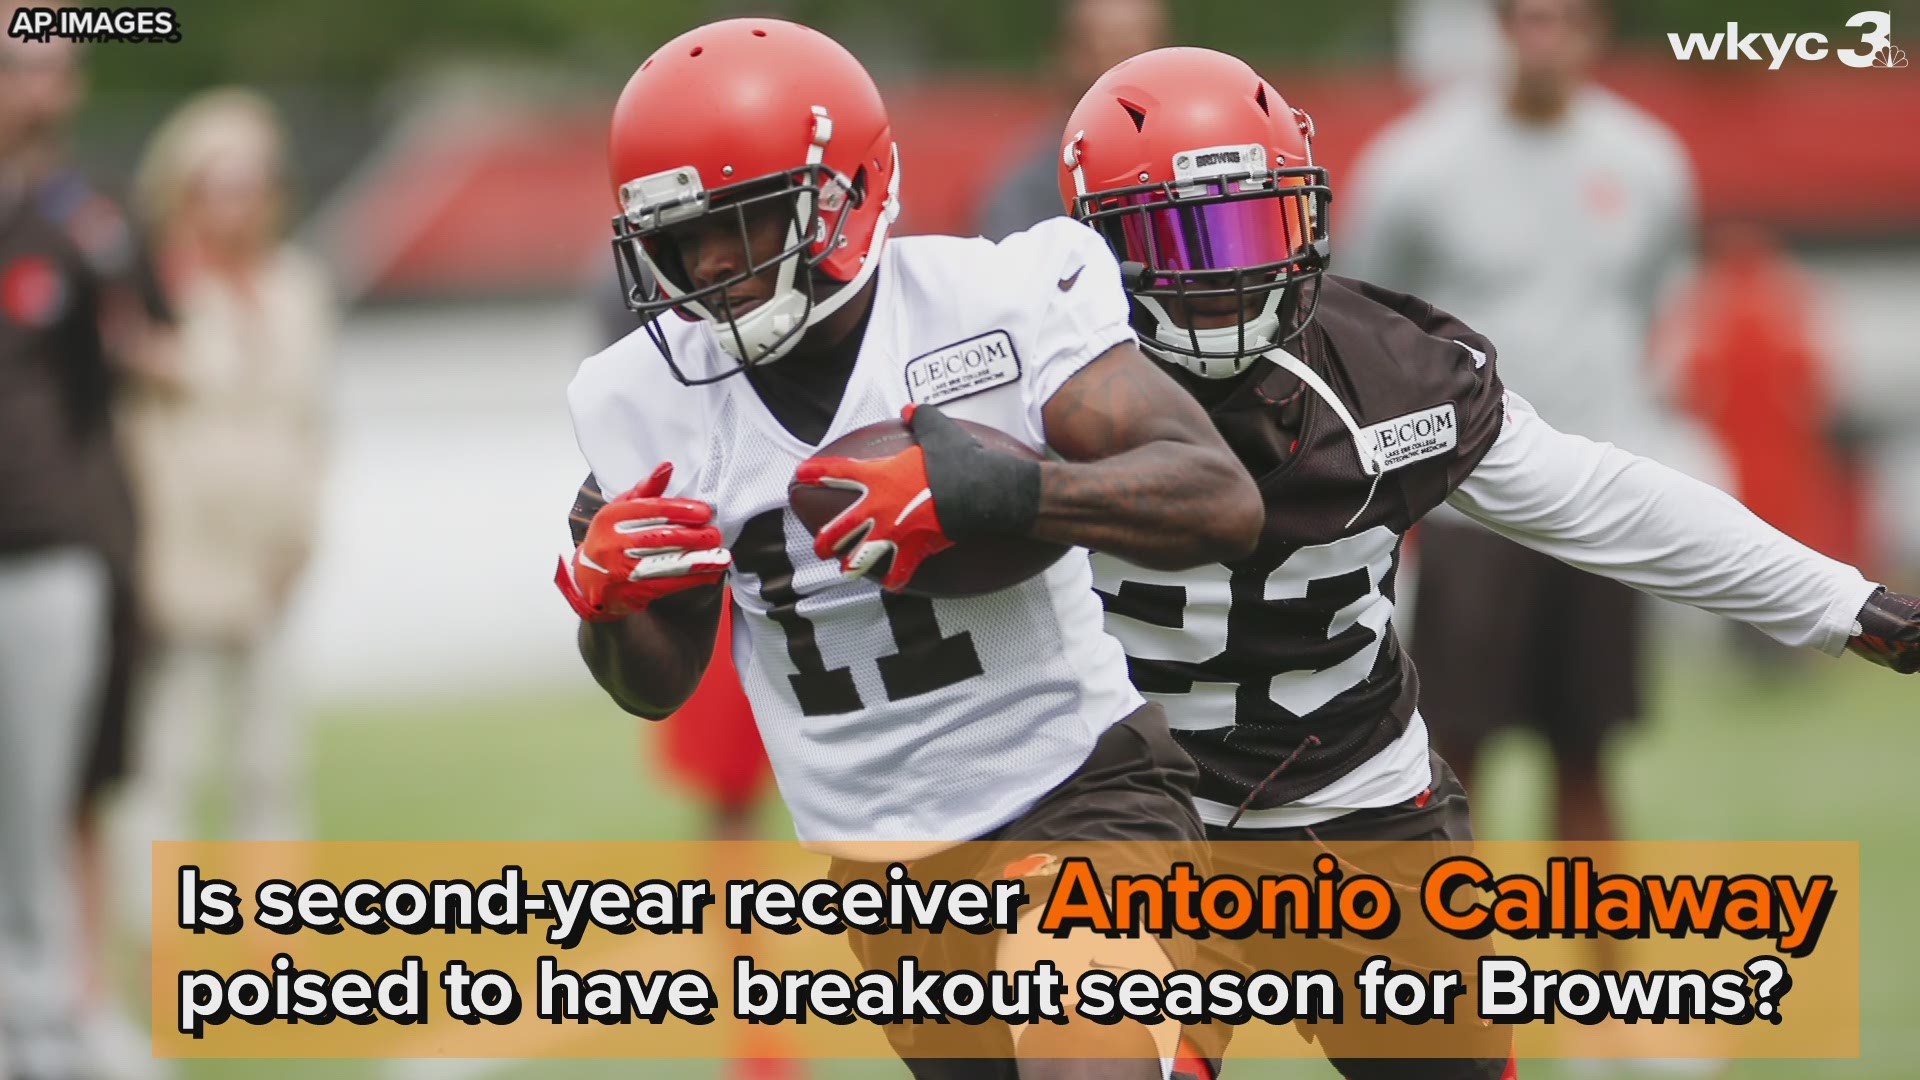 Teammates and coaches alike believe wide receiver Antonio Callaway has made great strides from his rookie season and is ready to take a huge step in 2019.